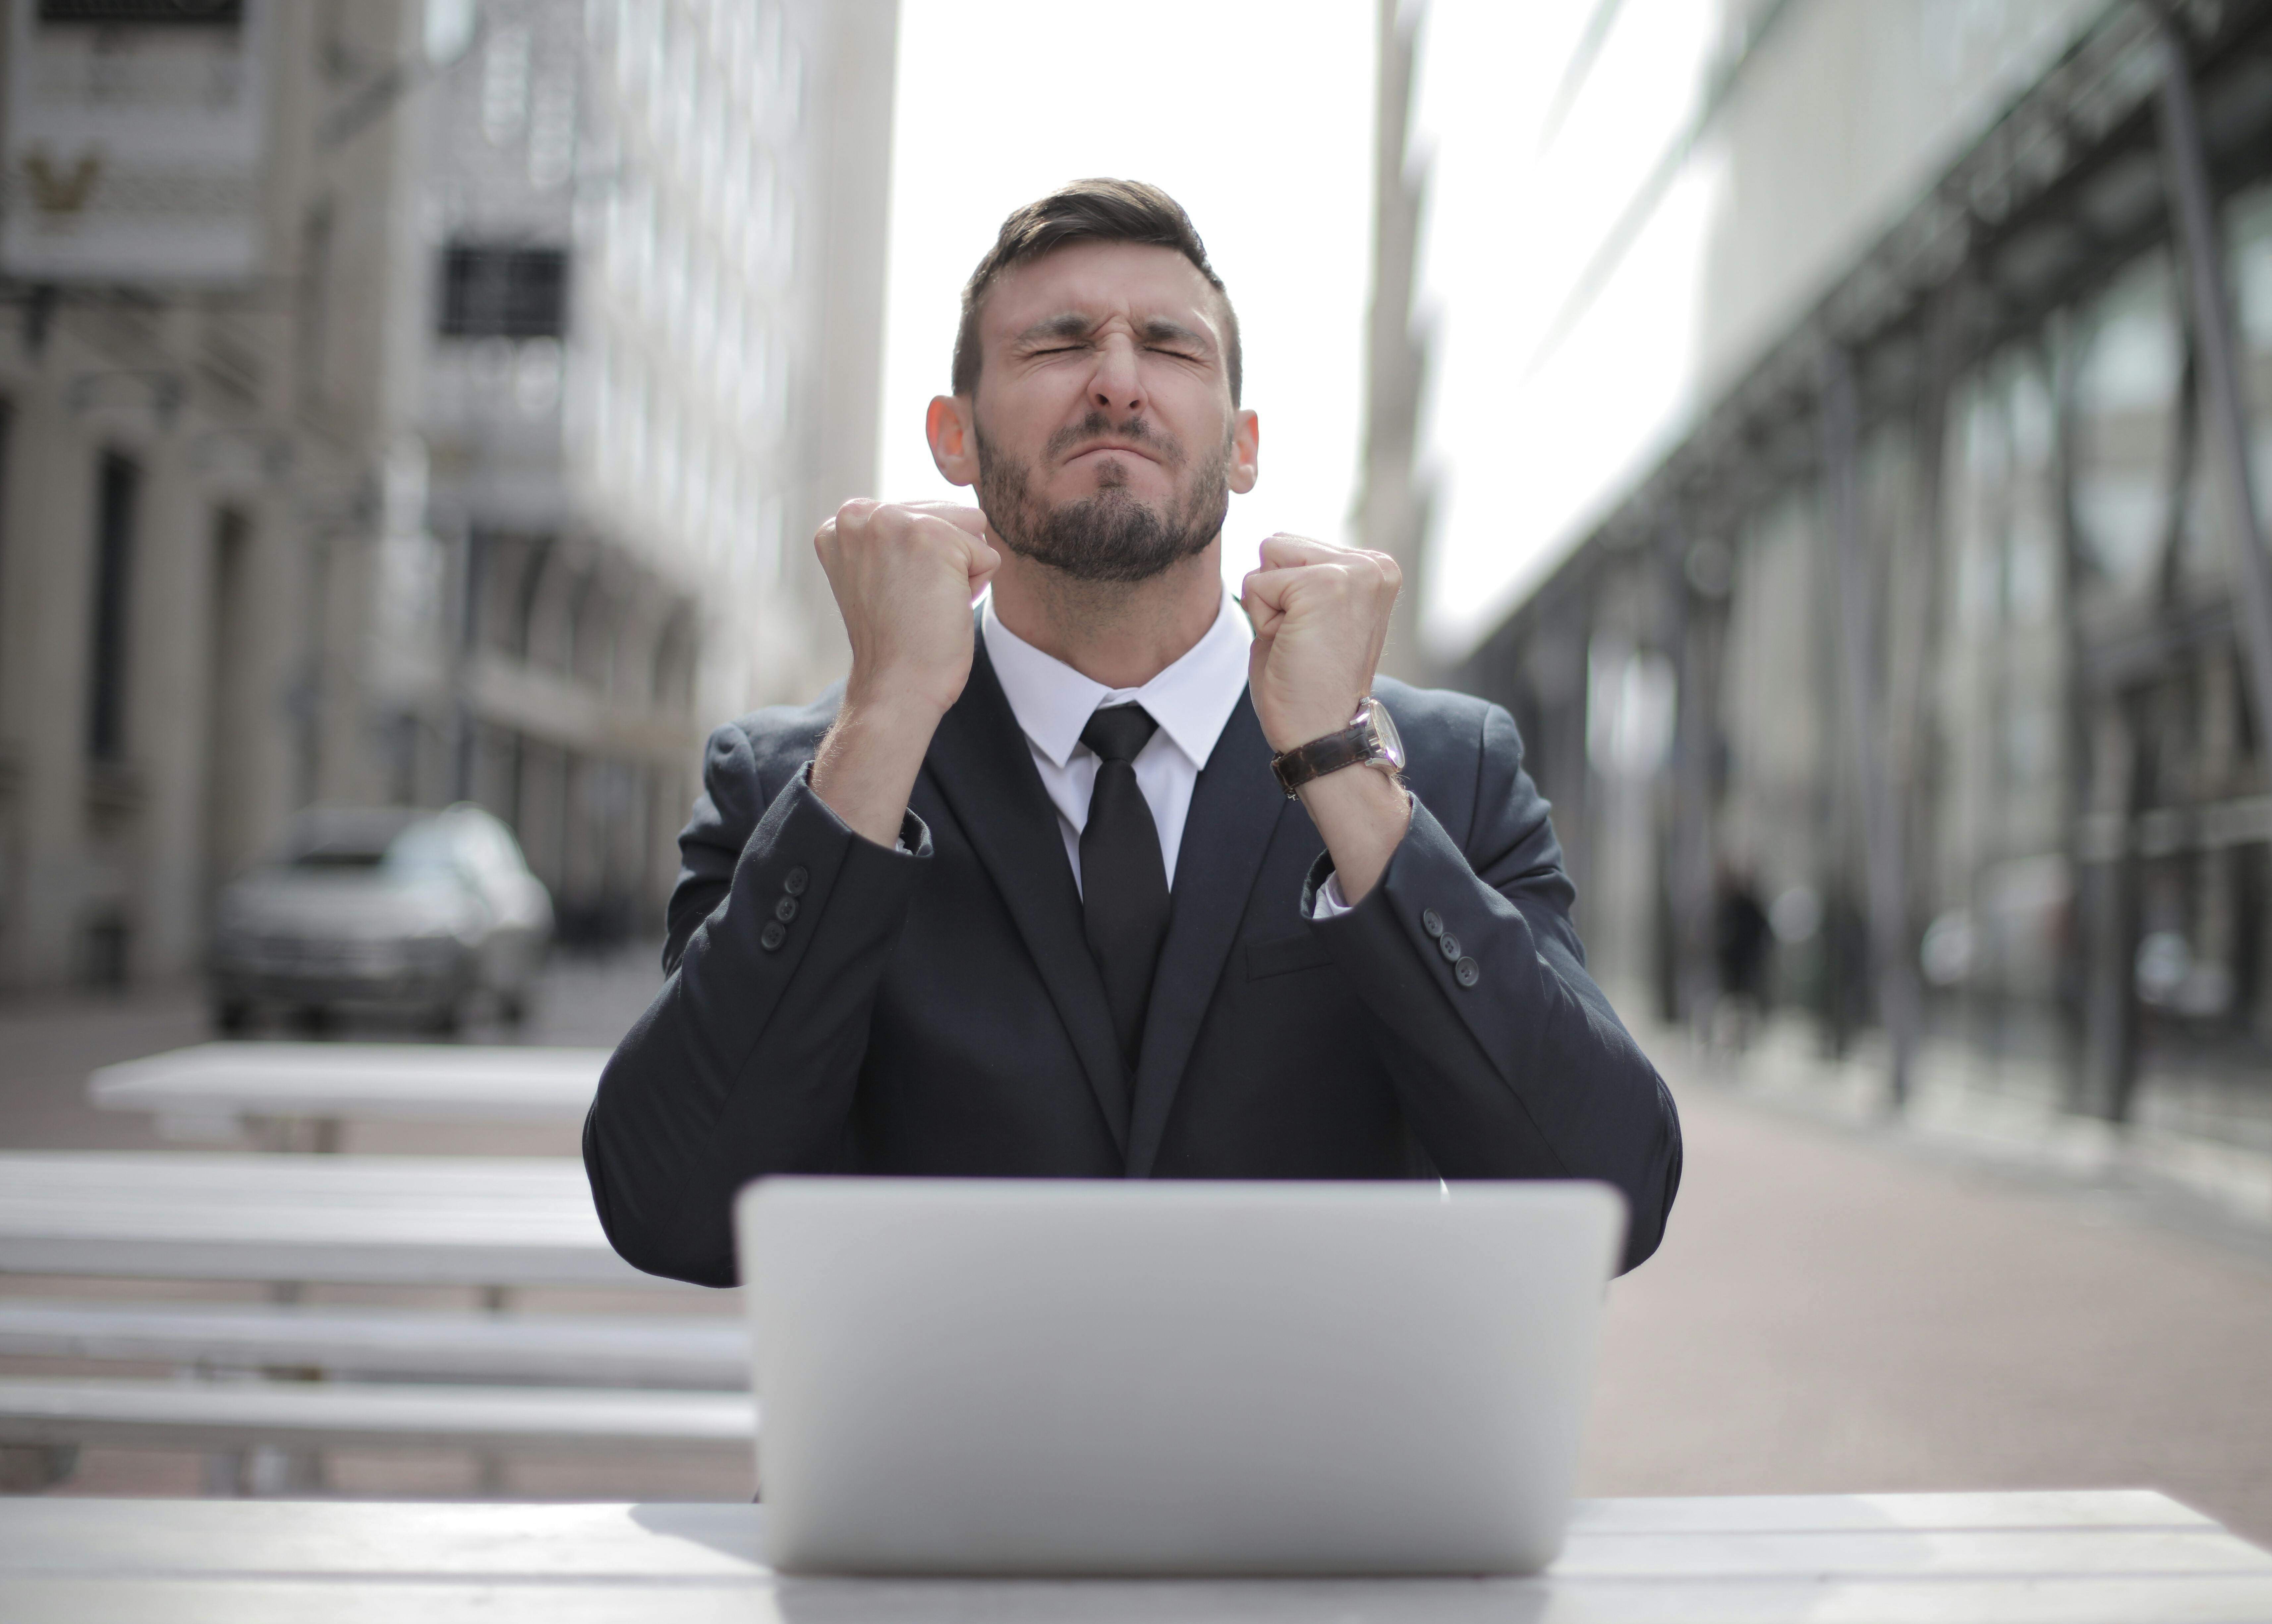 a man in a suit and tie with his hands up in front of a laptop